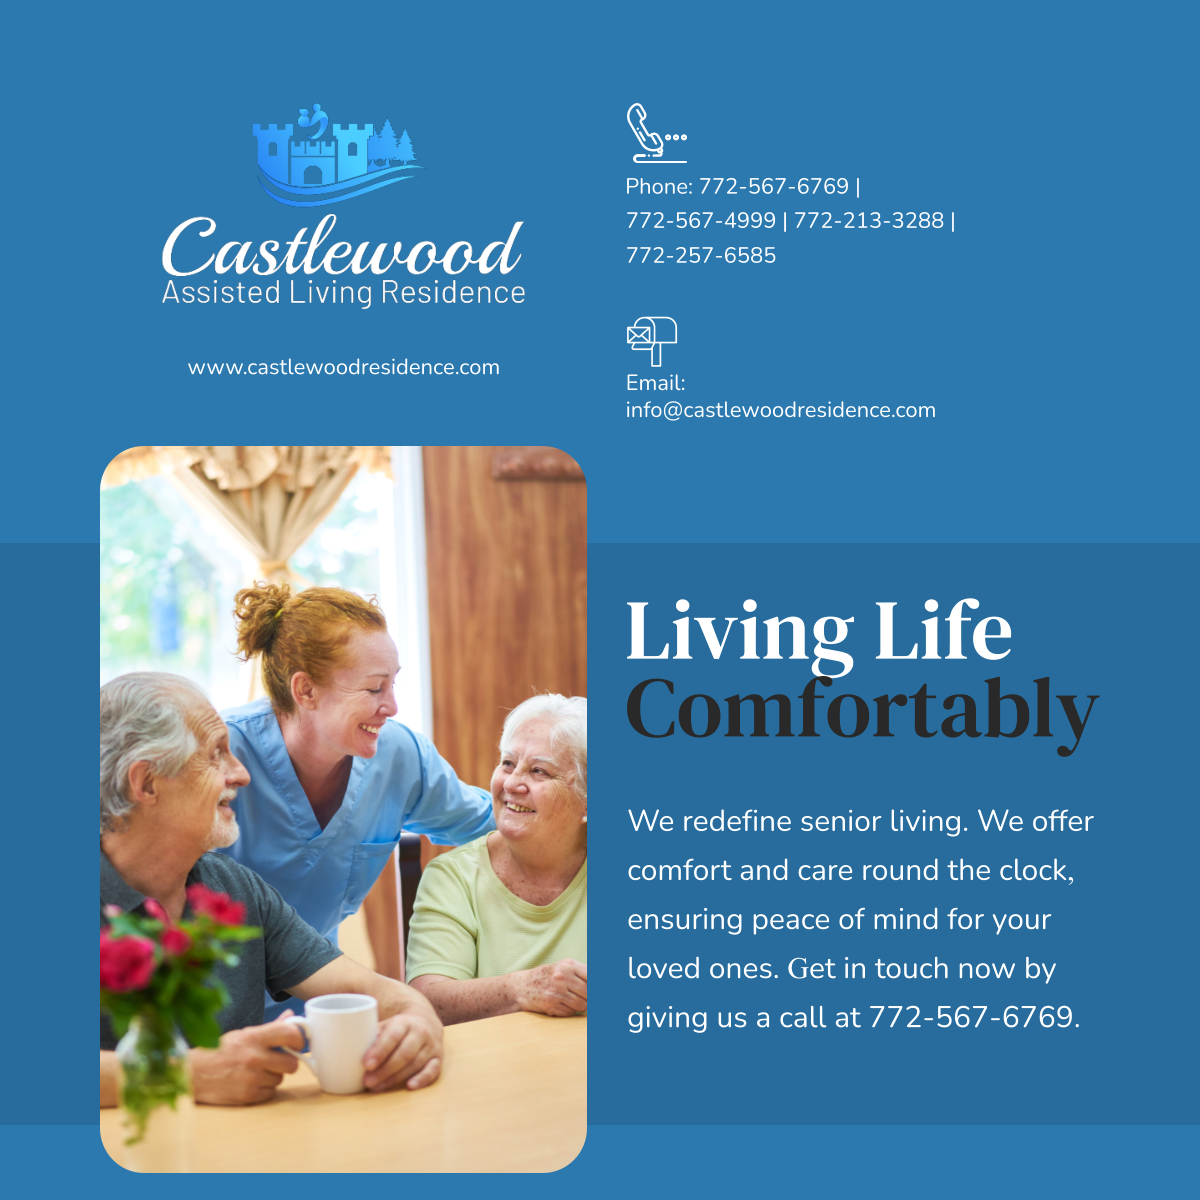 Experience the redefined senior living at Castlewood Assisted Living Residence. We provide 24/7 comfortable care, giving peace of mind to your loved ones. Reach out now at 772-567-6769.

#ComfortableCare #AssistedLivingHome #VeroBeachFL #CallUs